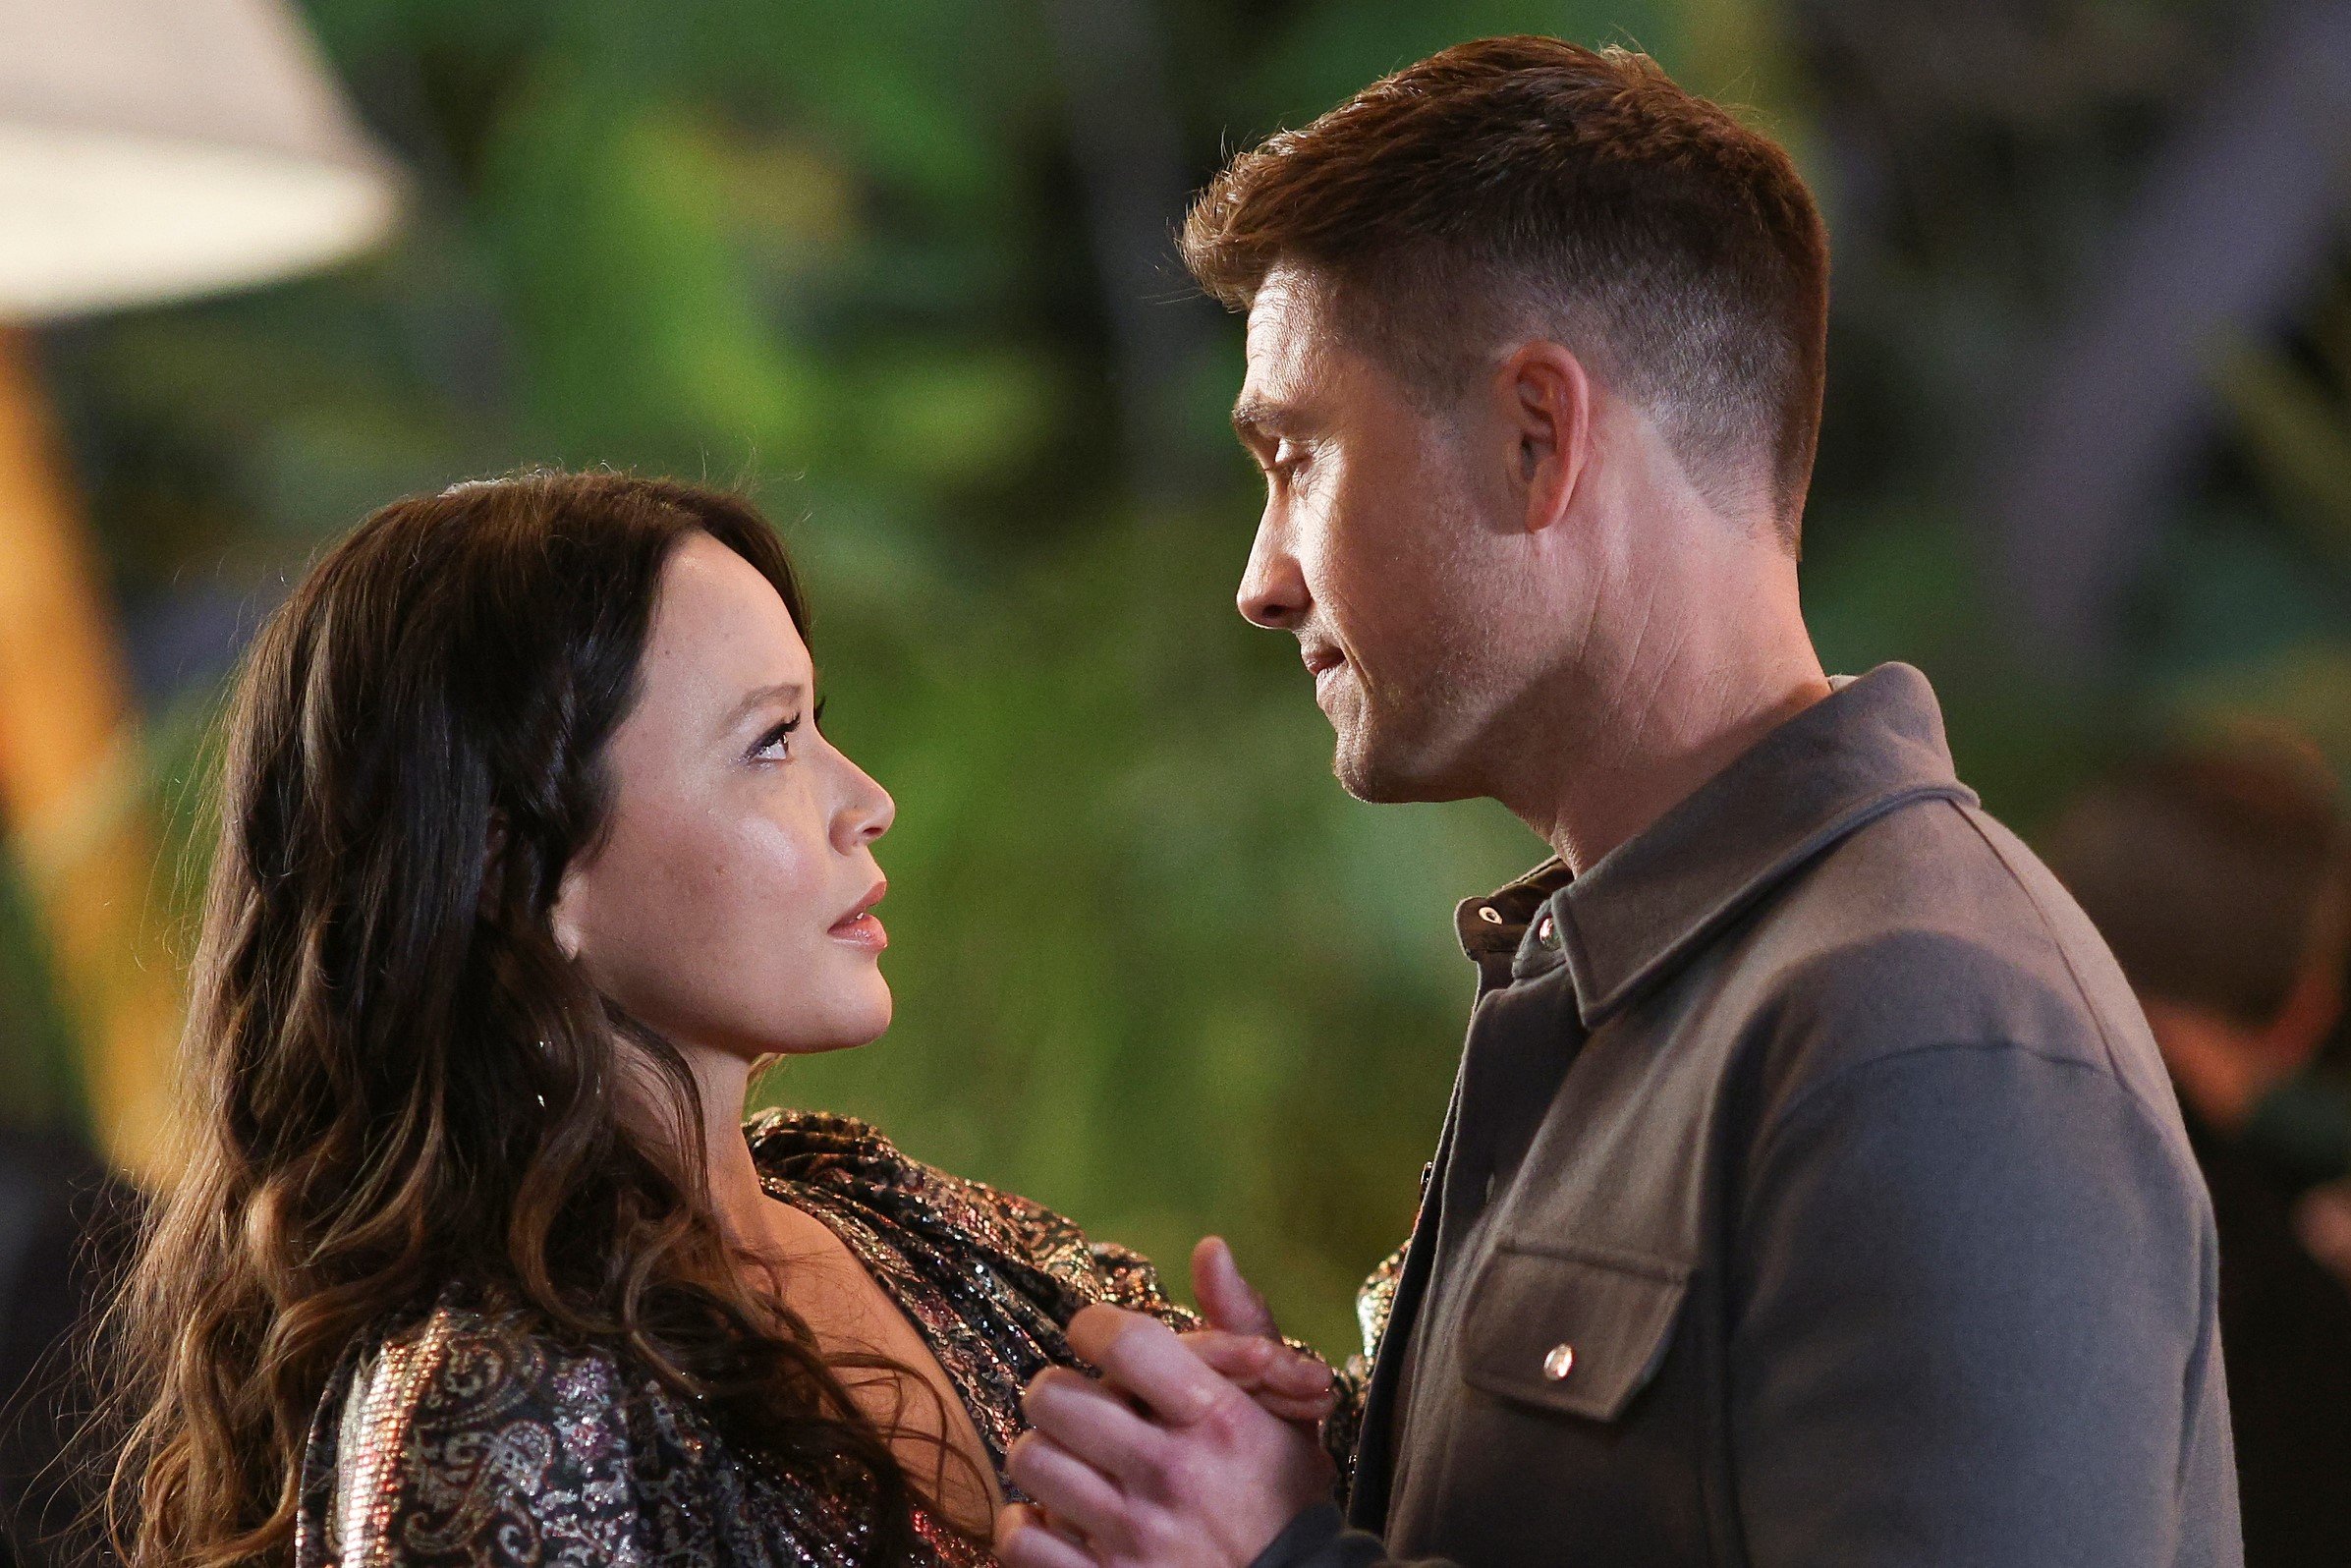 Melissa O'Neil and Eric Winter, in character as Lucy Chen and Tim Bradford in 'The Rookie' Season 4, dance in a scene. Lucy wears a black and gold dress. Tim wears a light gray jacket.